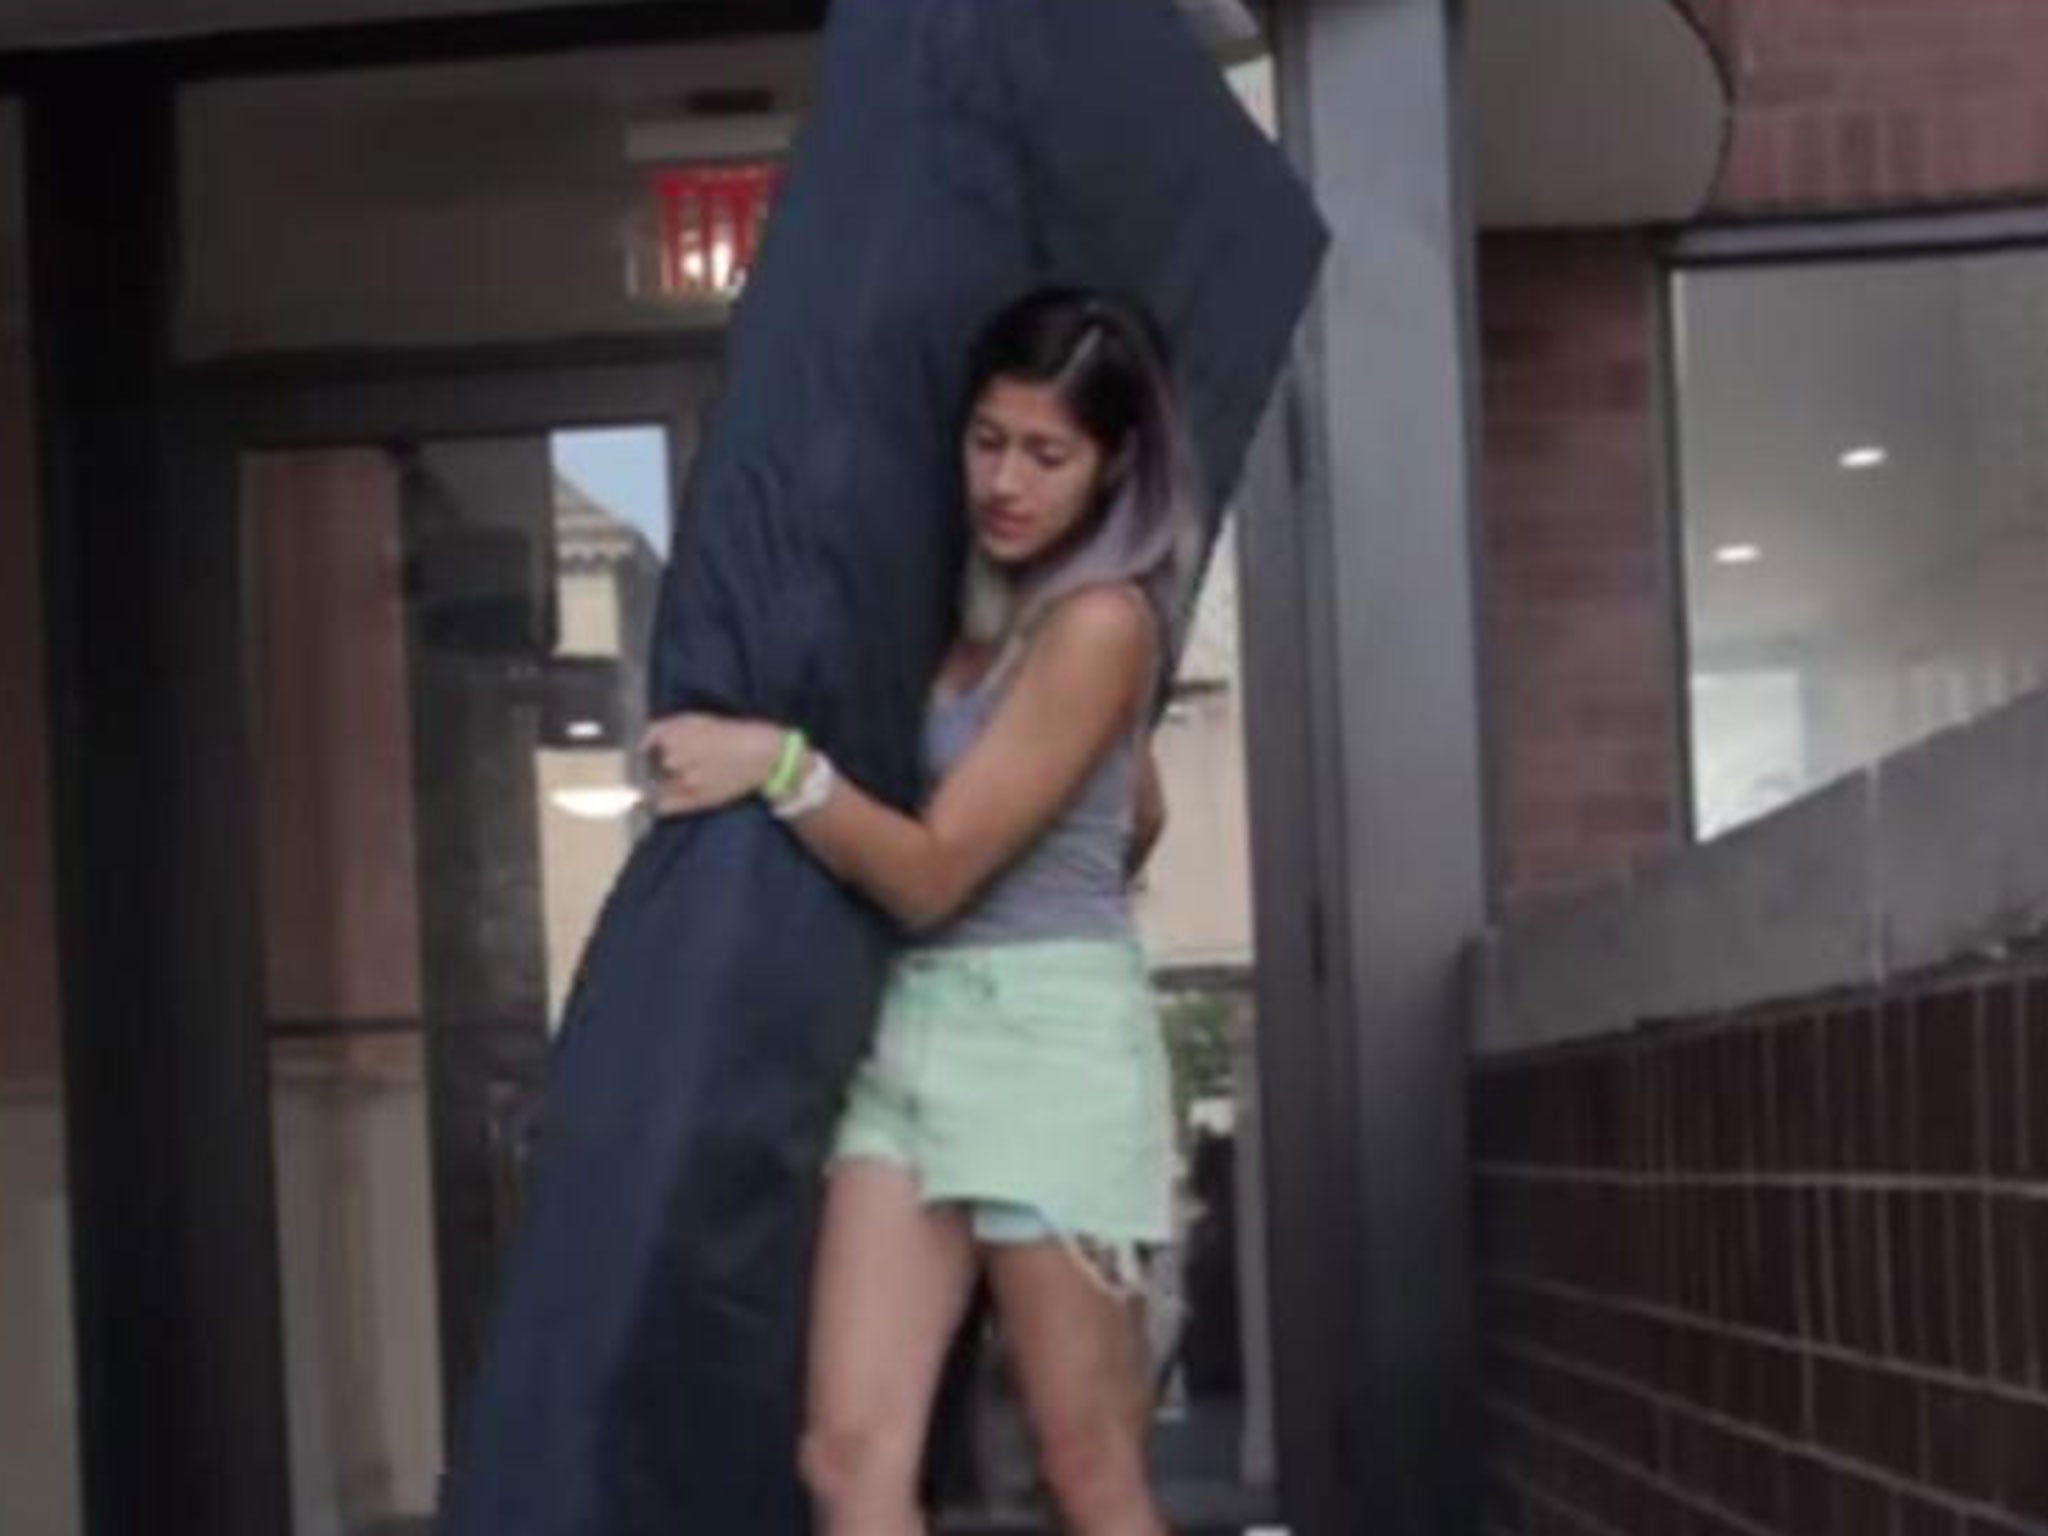 A student is dragging her mattress around university every day until her alleged rapist is removed from classes